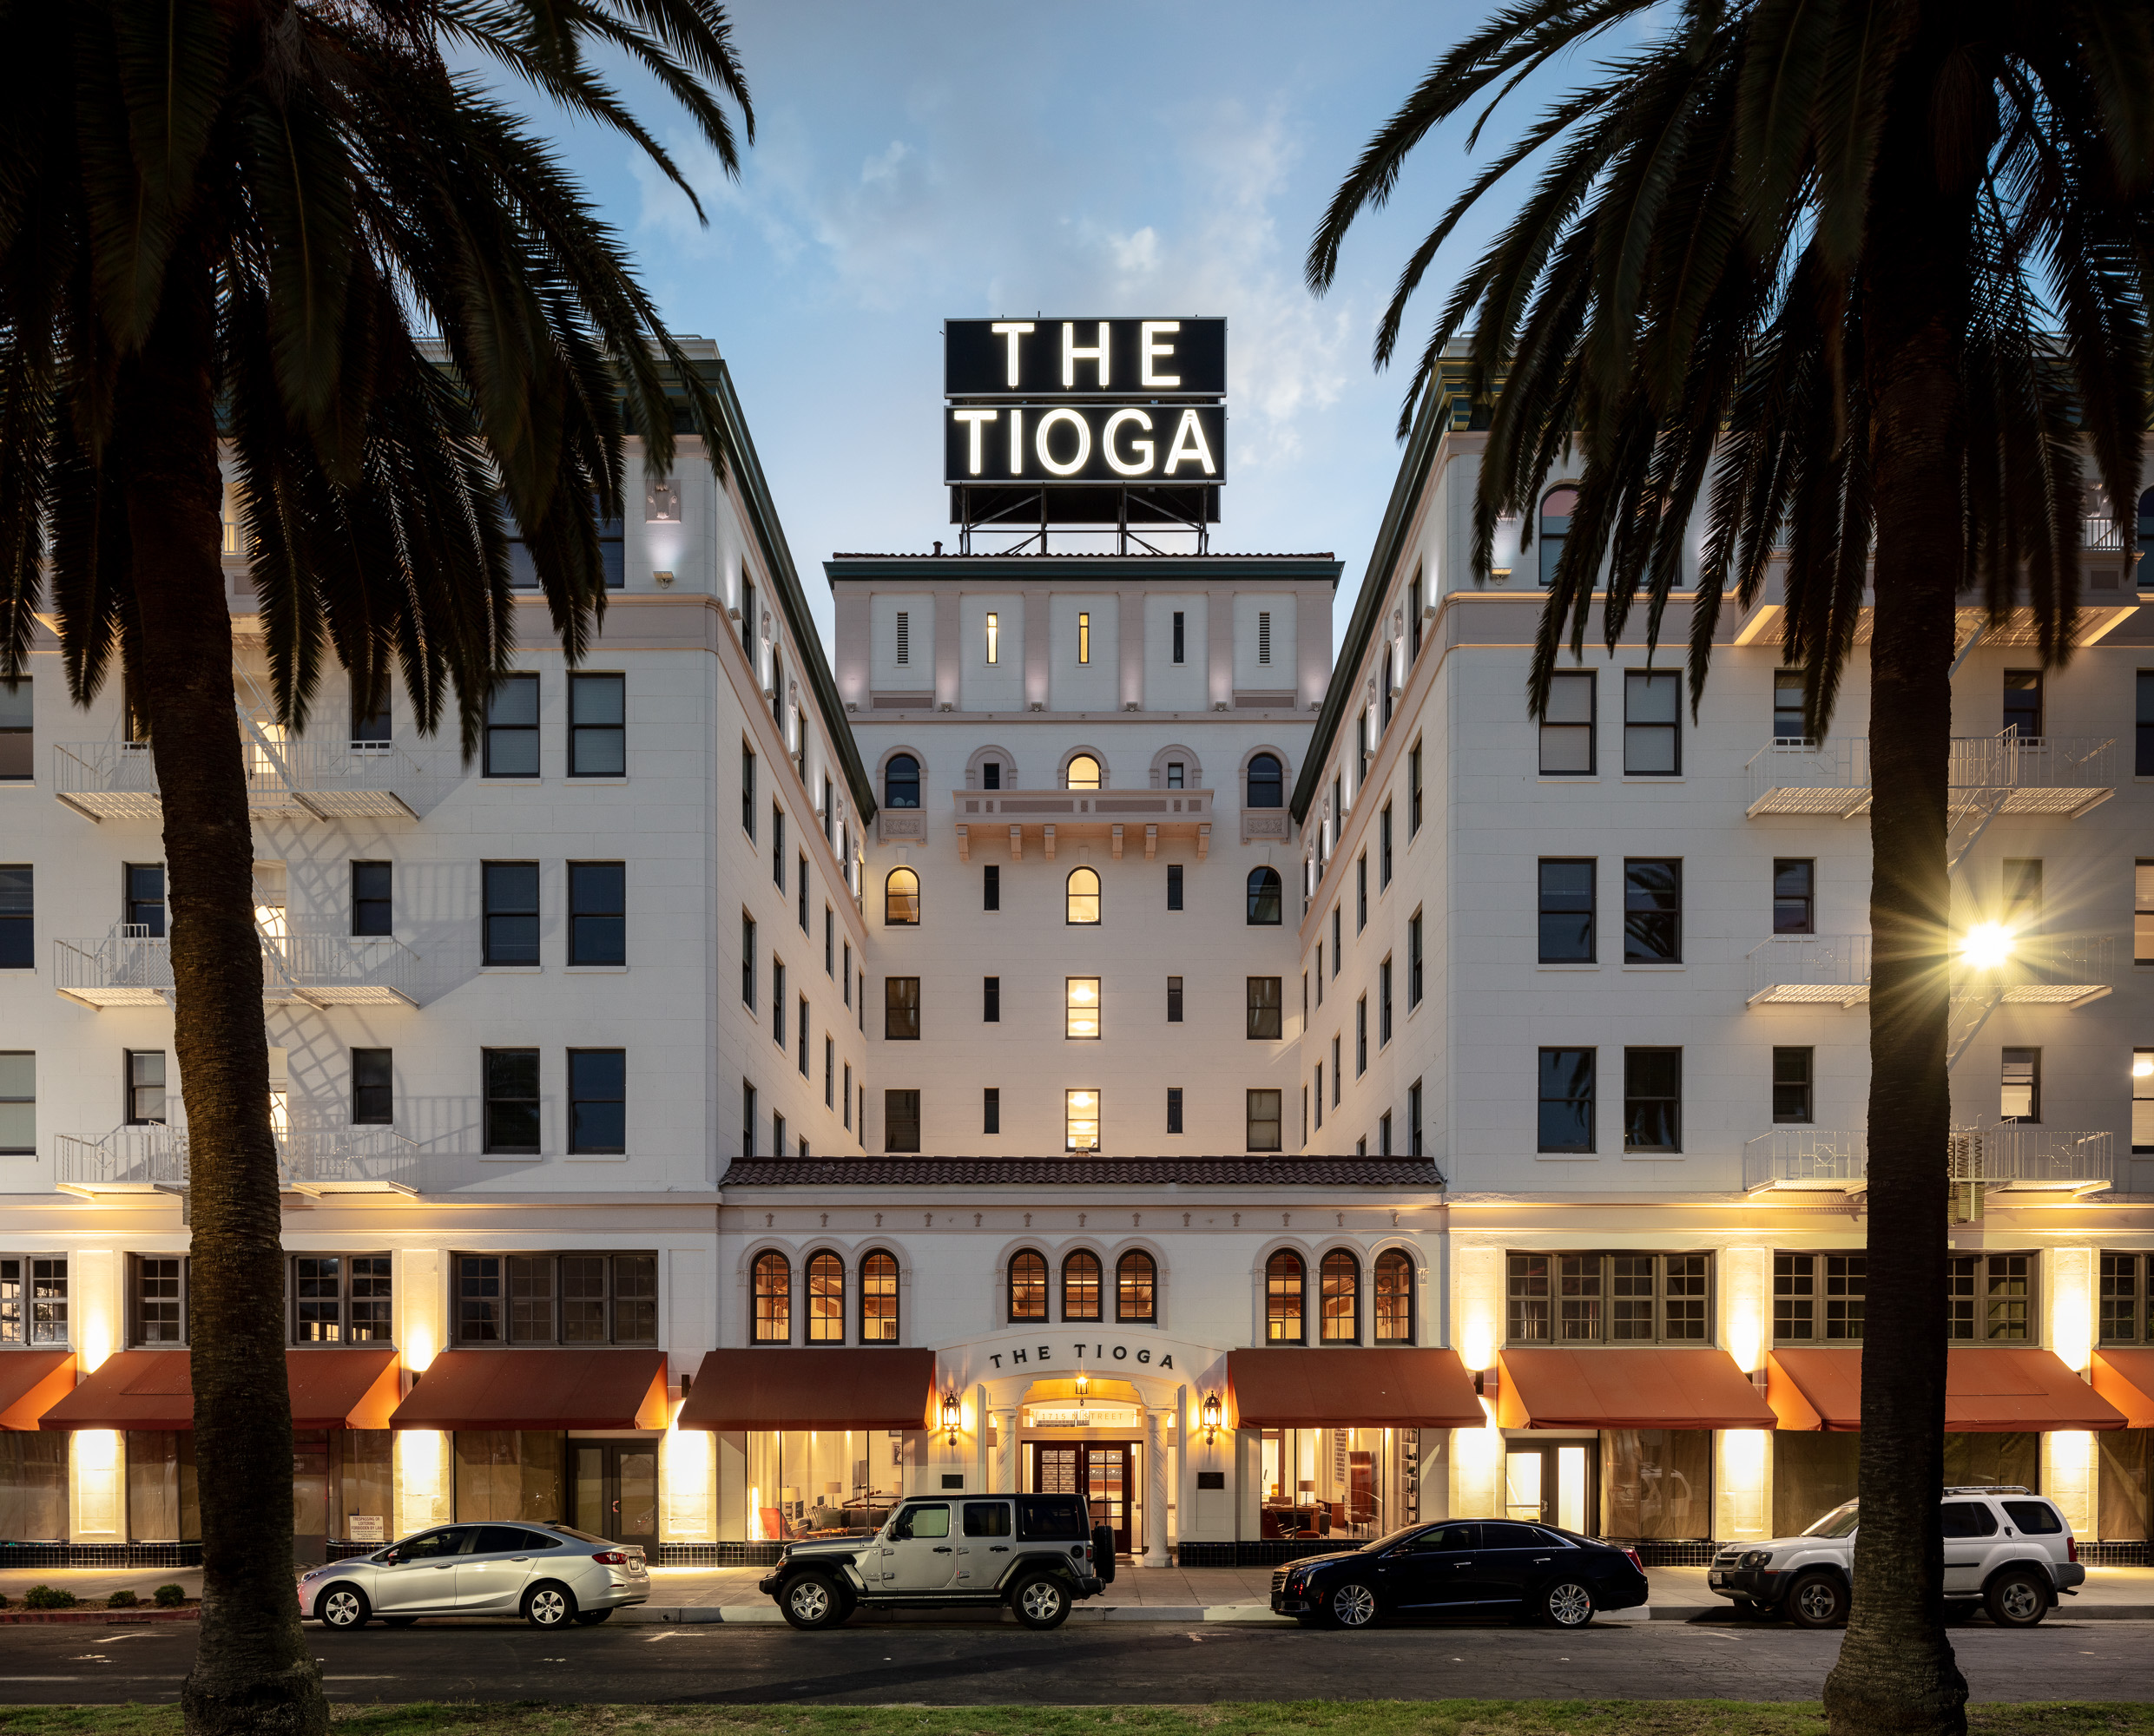 The Tioga, multifamily housing by Page & Turnbull, adapted from the iconic Hotel Tioga, Merced, Calif.